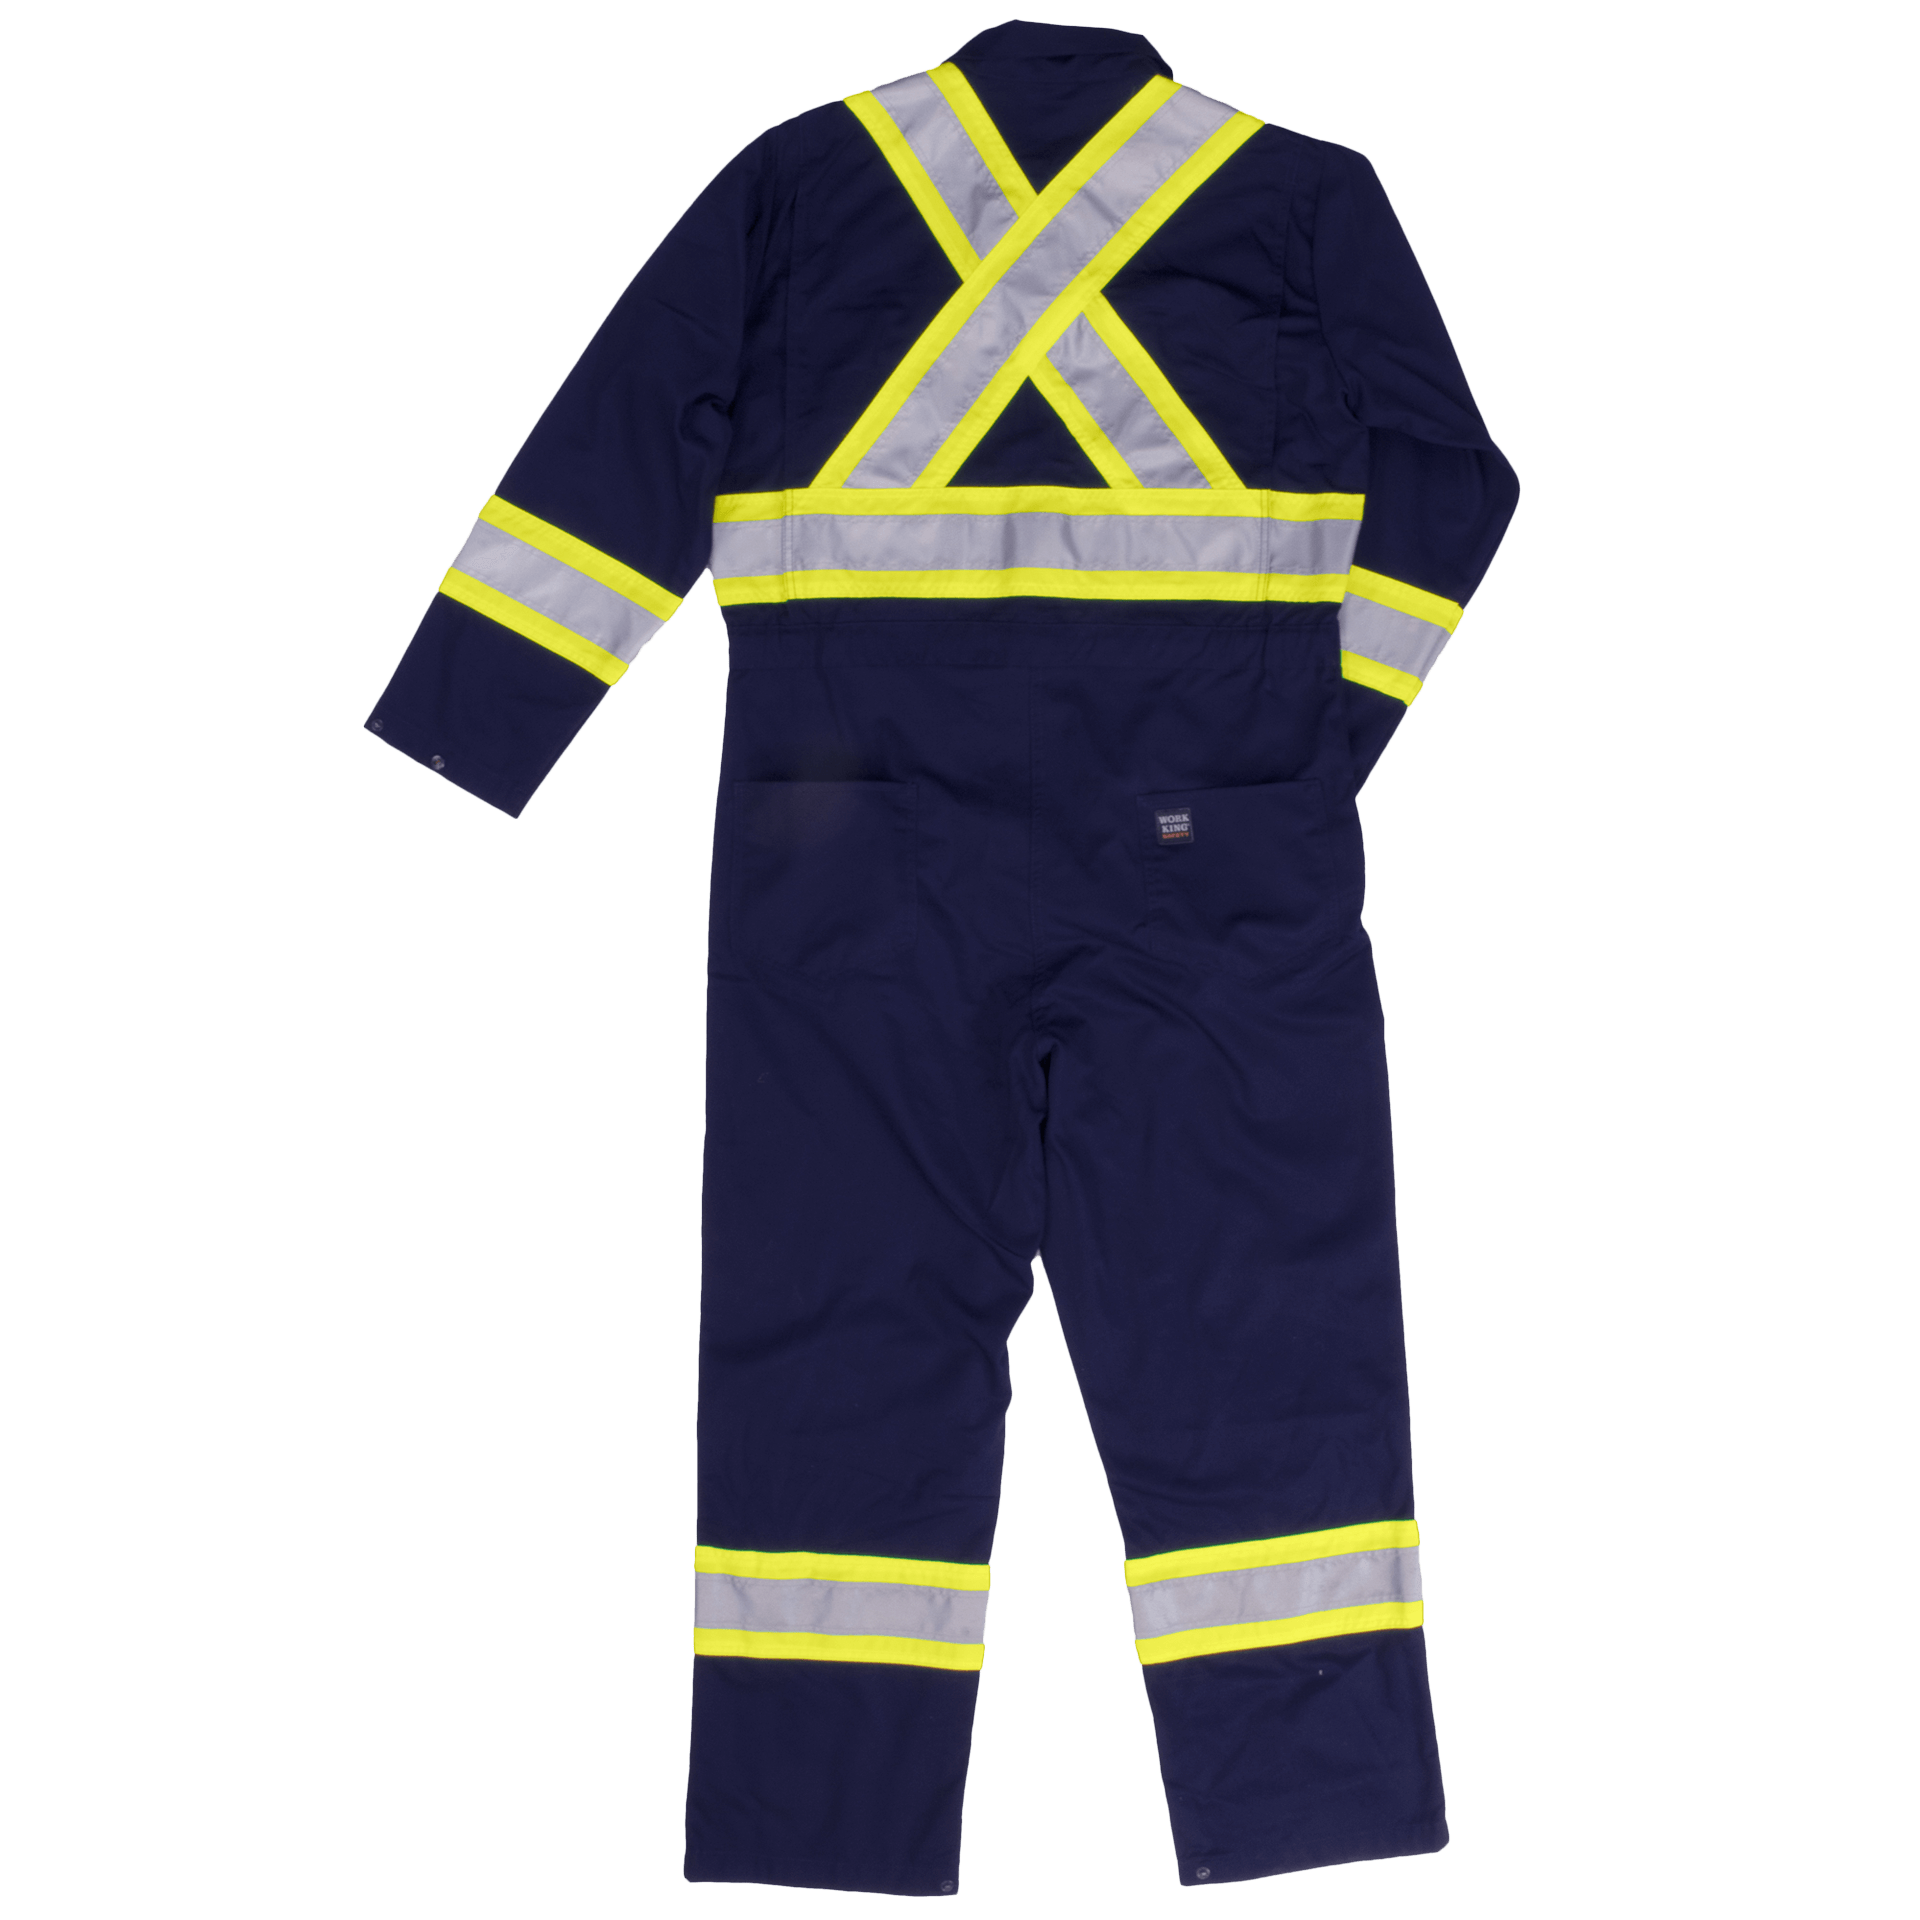 Tough Duck Unlined Safety Coverall - S792 - Navy - back